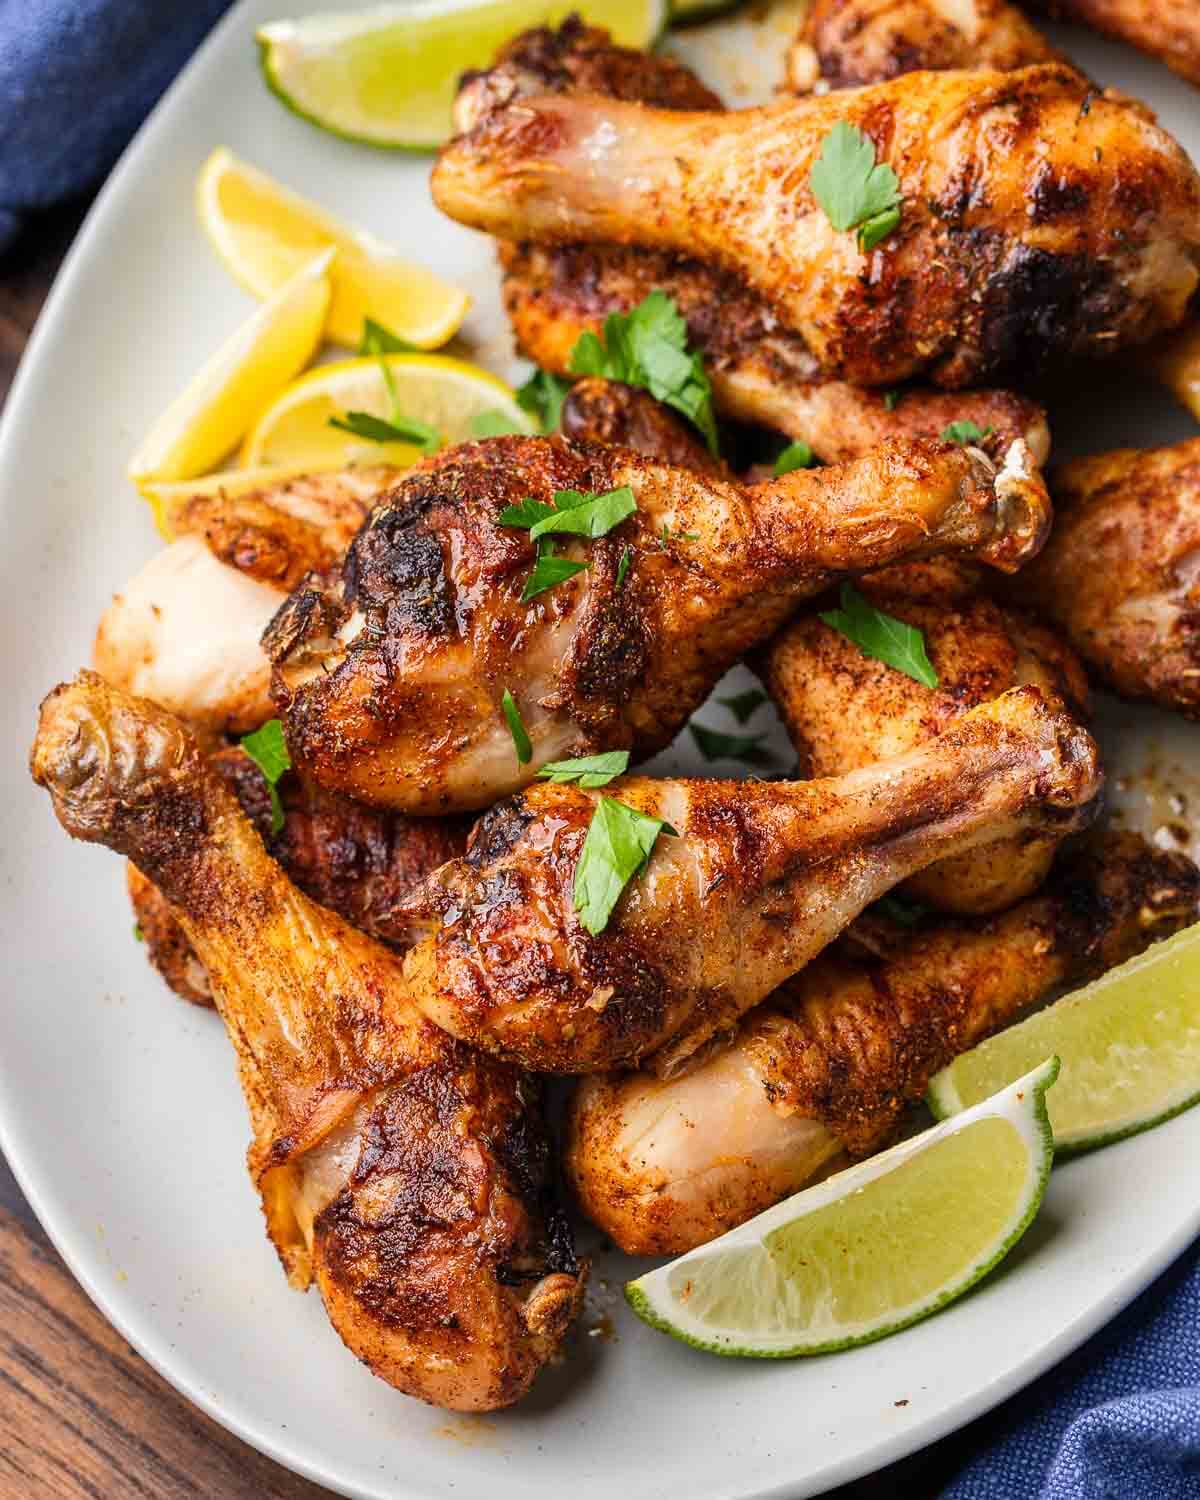 Platter with baked chicken legs.